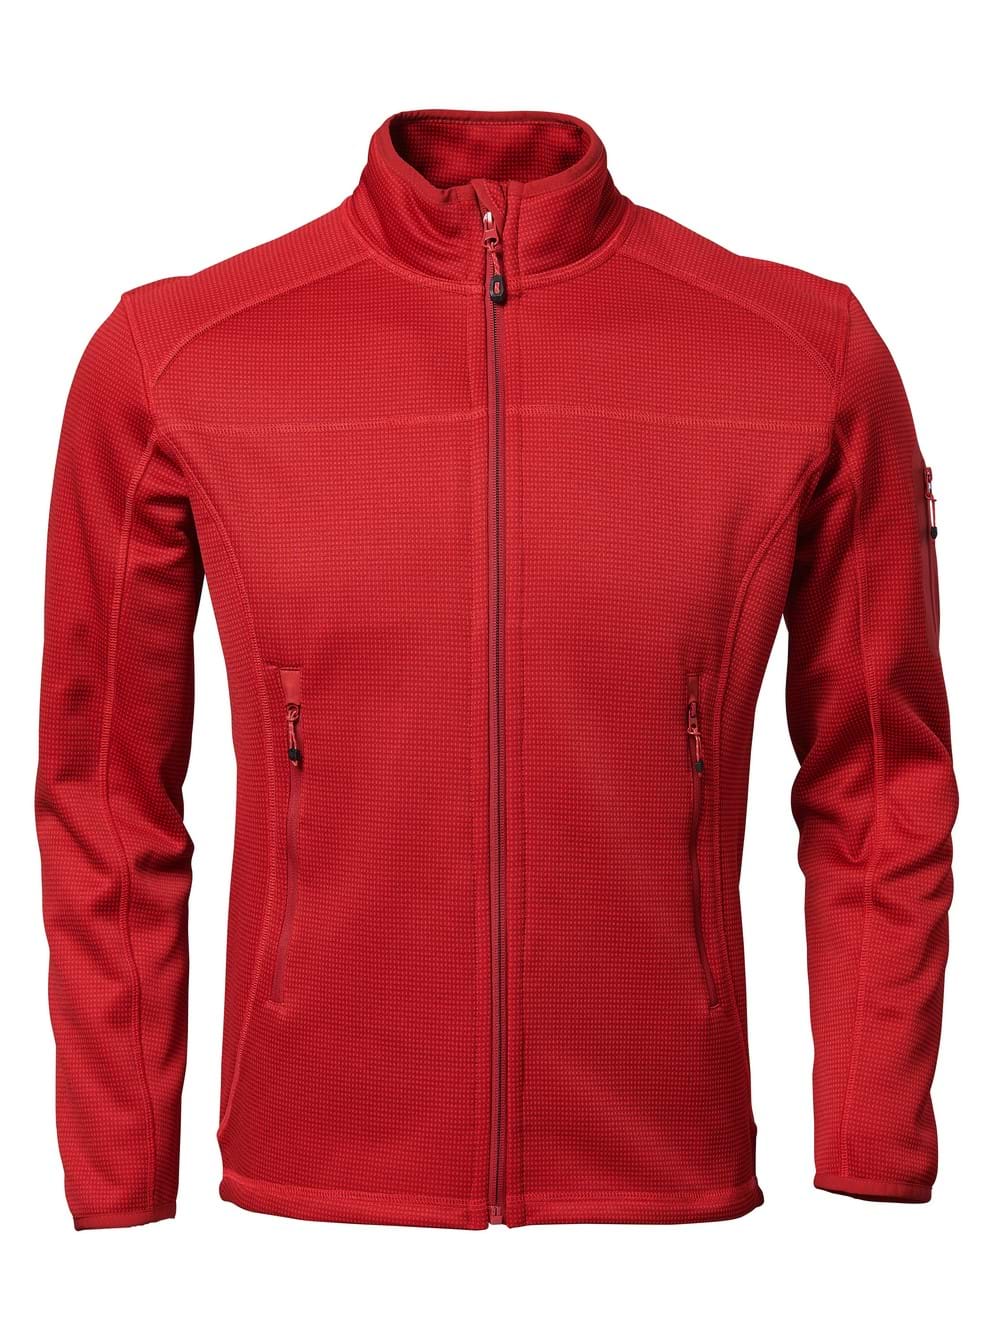 Voyager Jacket - Red / SS